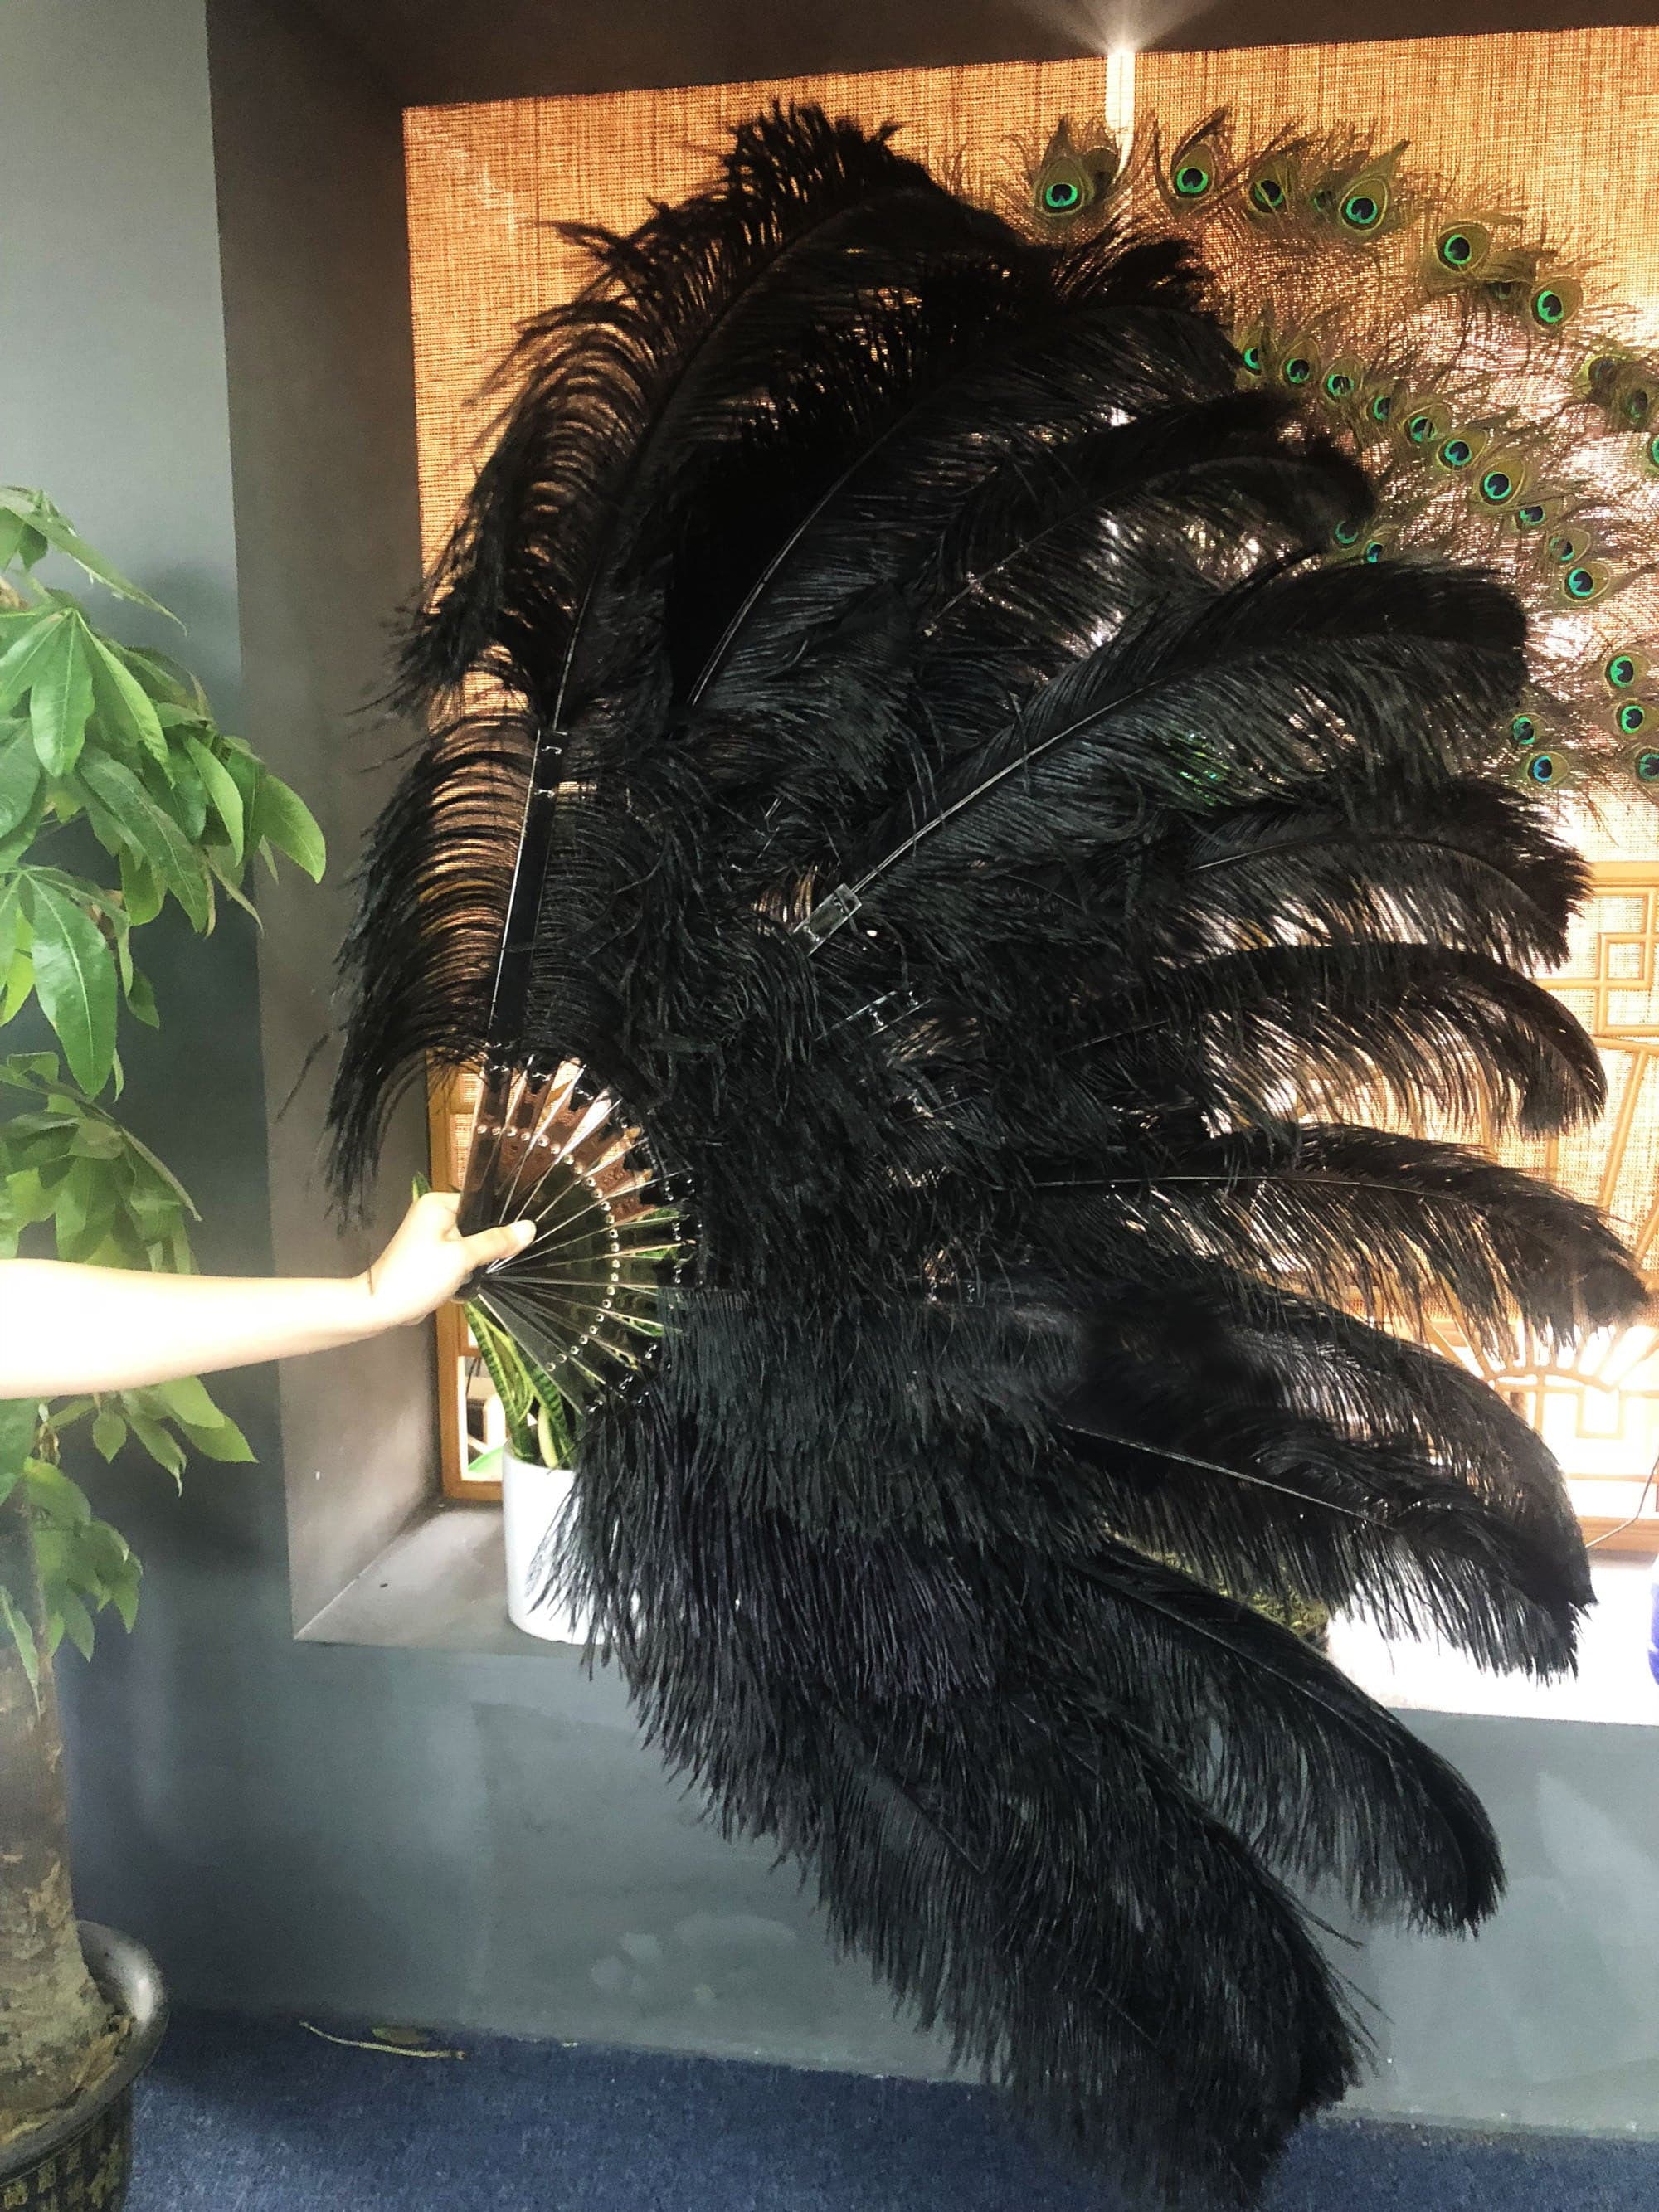 hotfans Burlesque 4 Layers Black Ostrich Feather Fan Opened 67'' with Travel Leather Bag Right Hand Fan